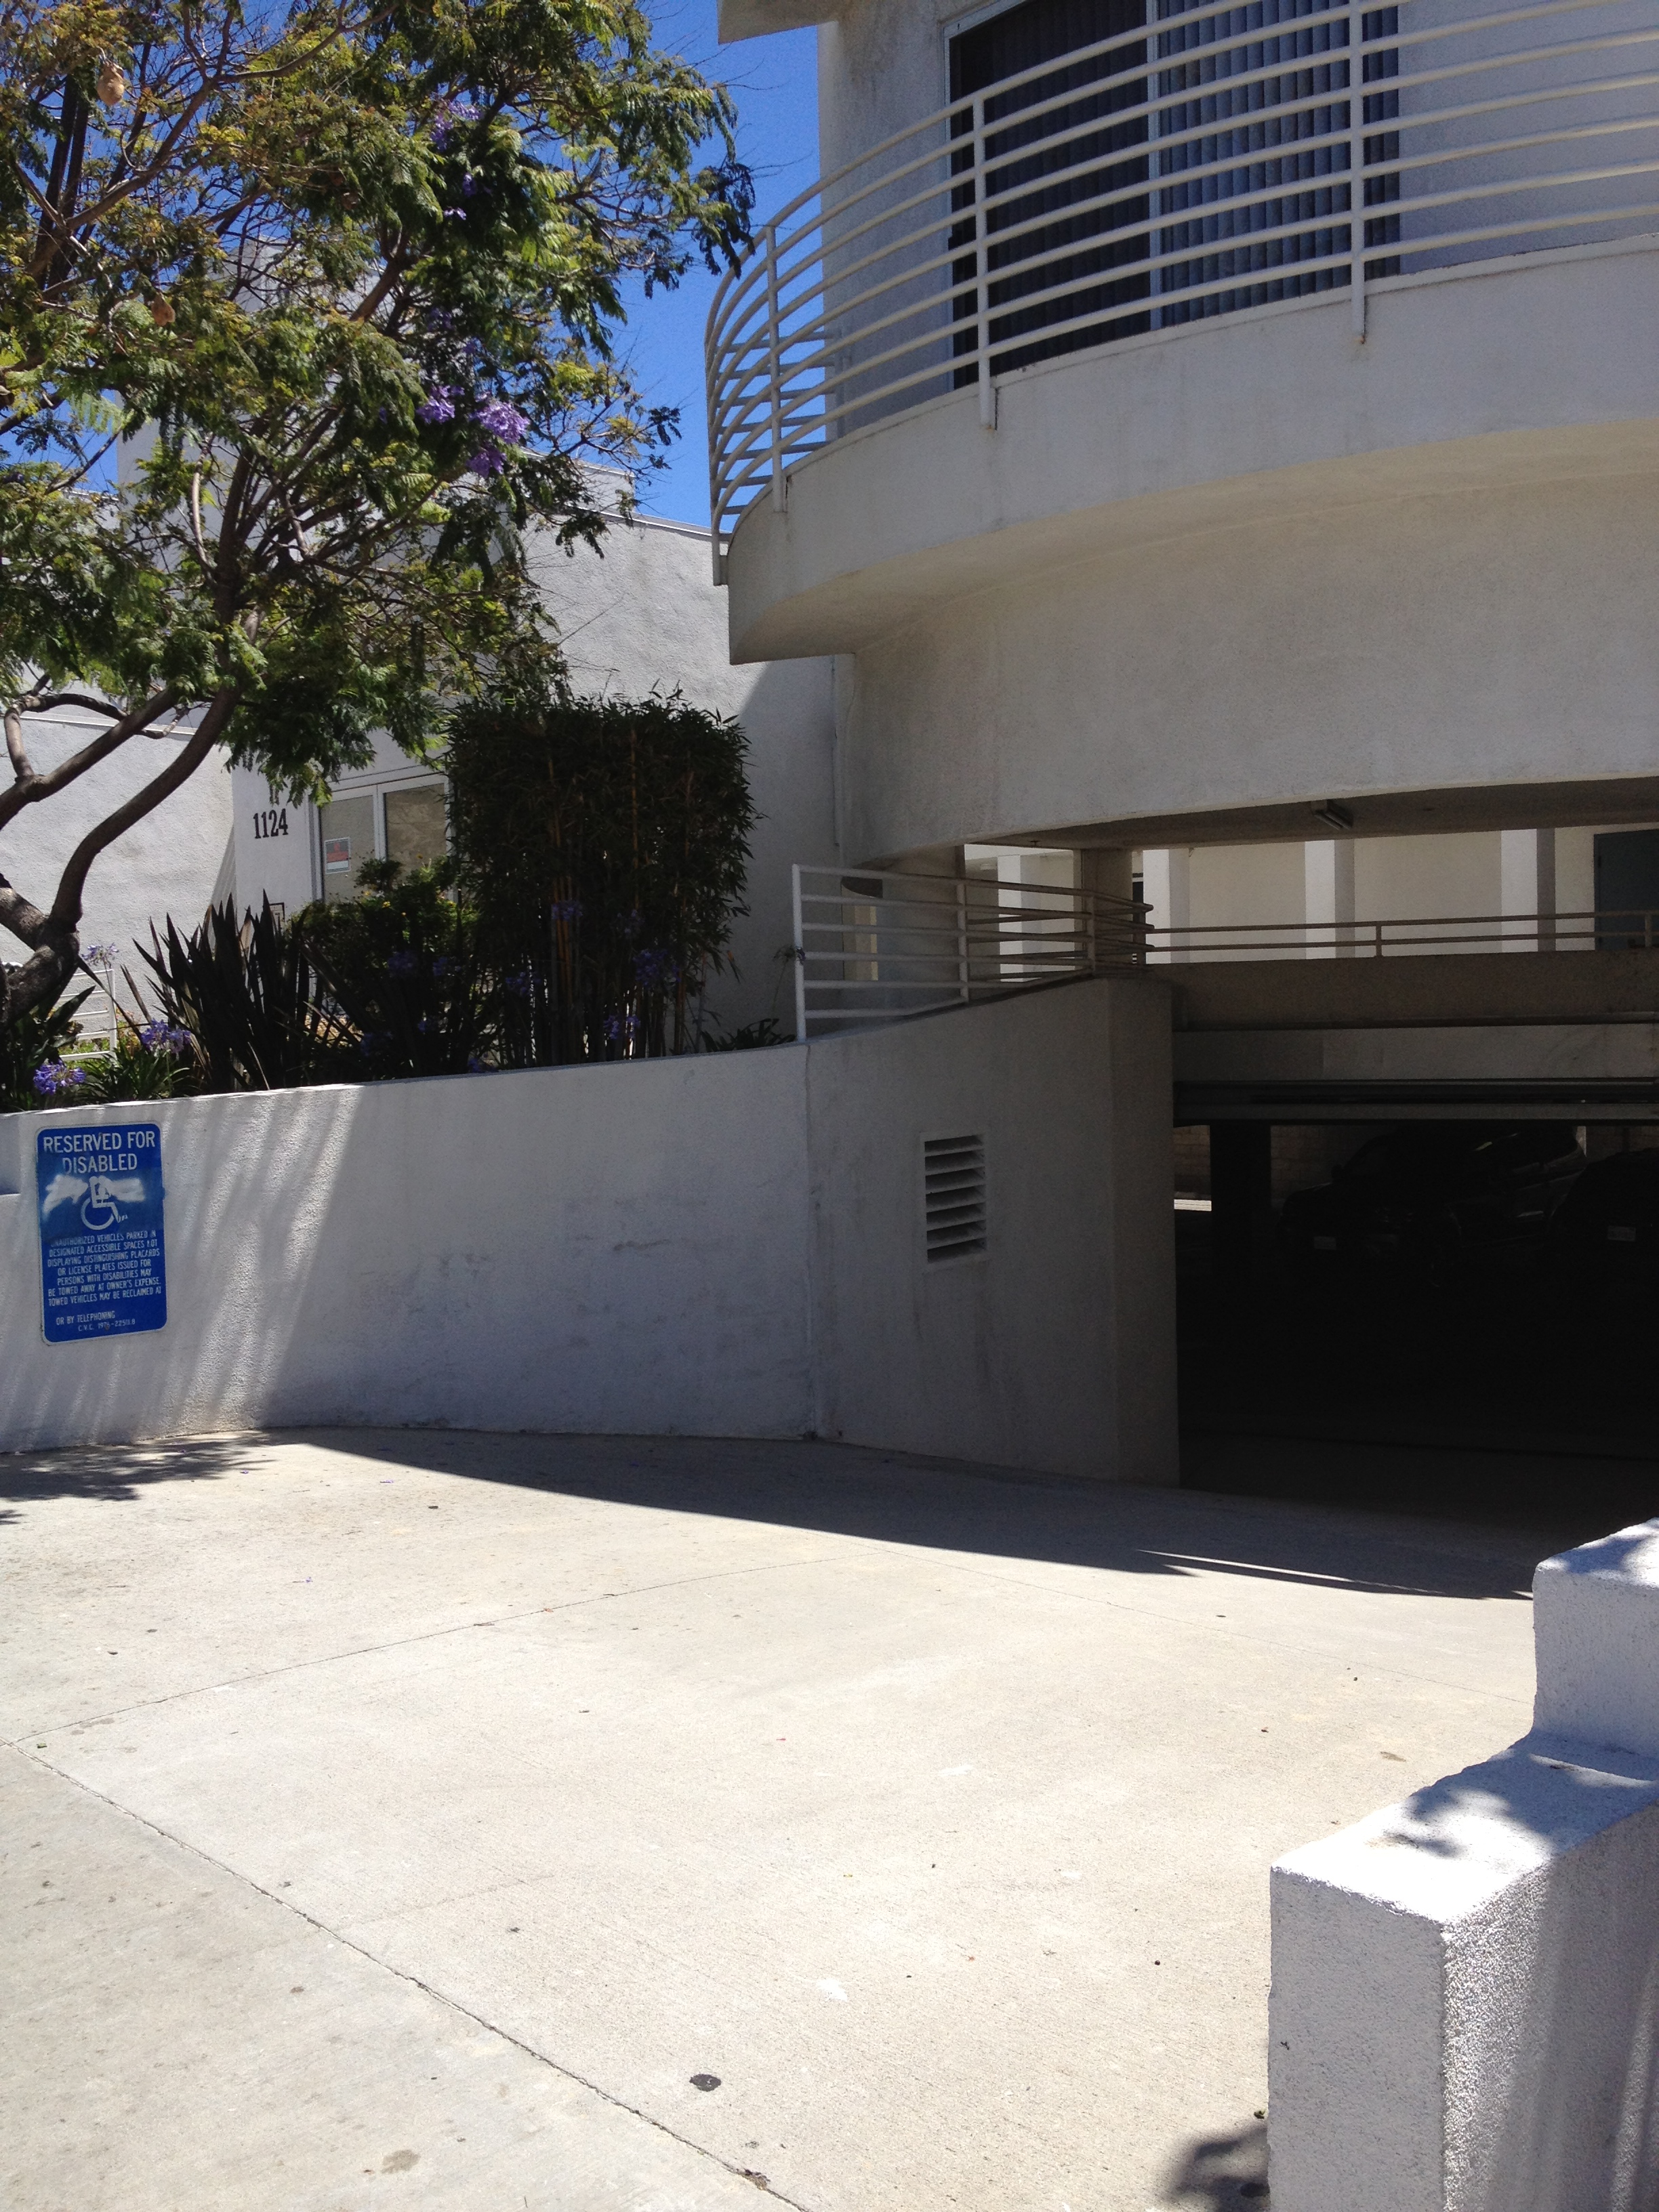 view of driveway leading to under ground parking area